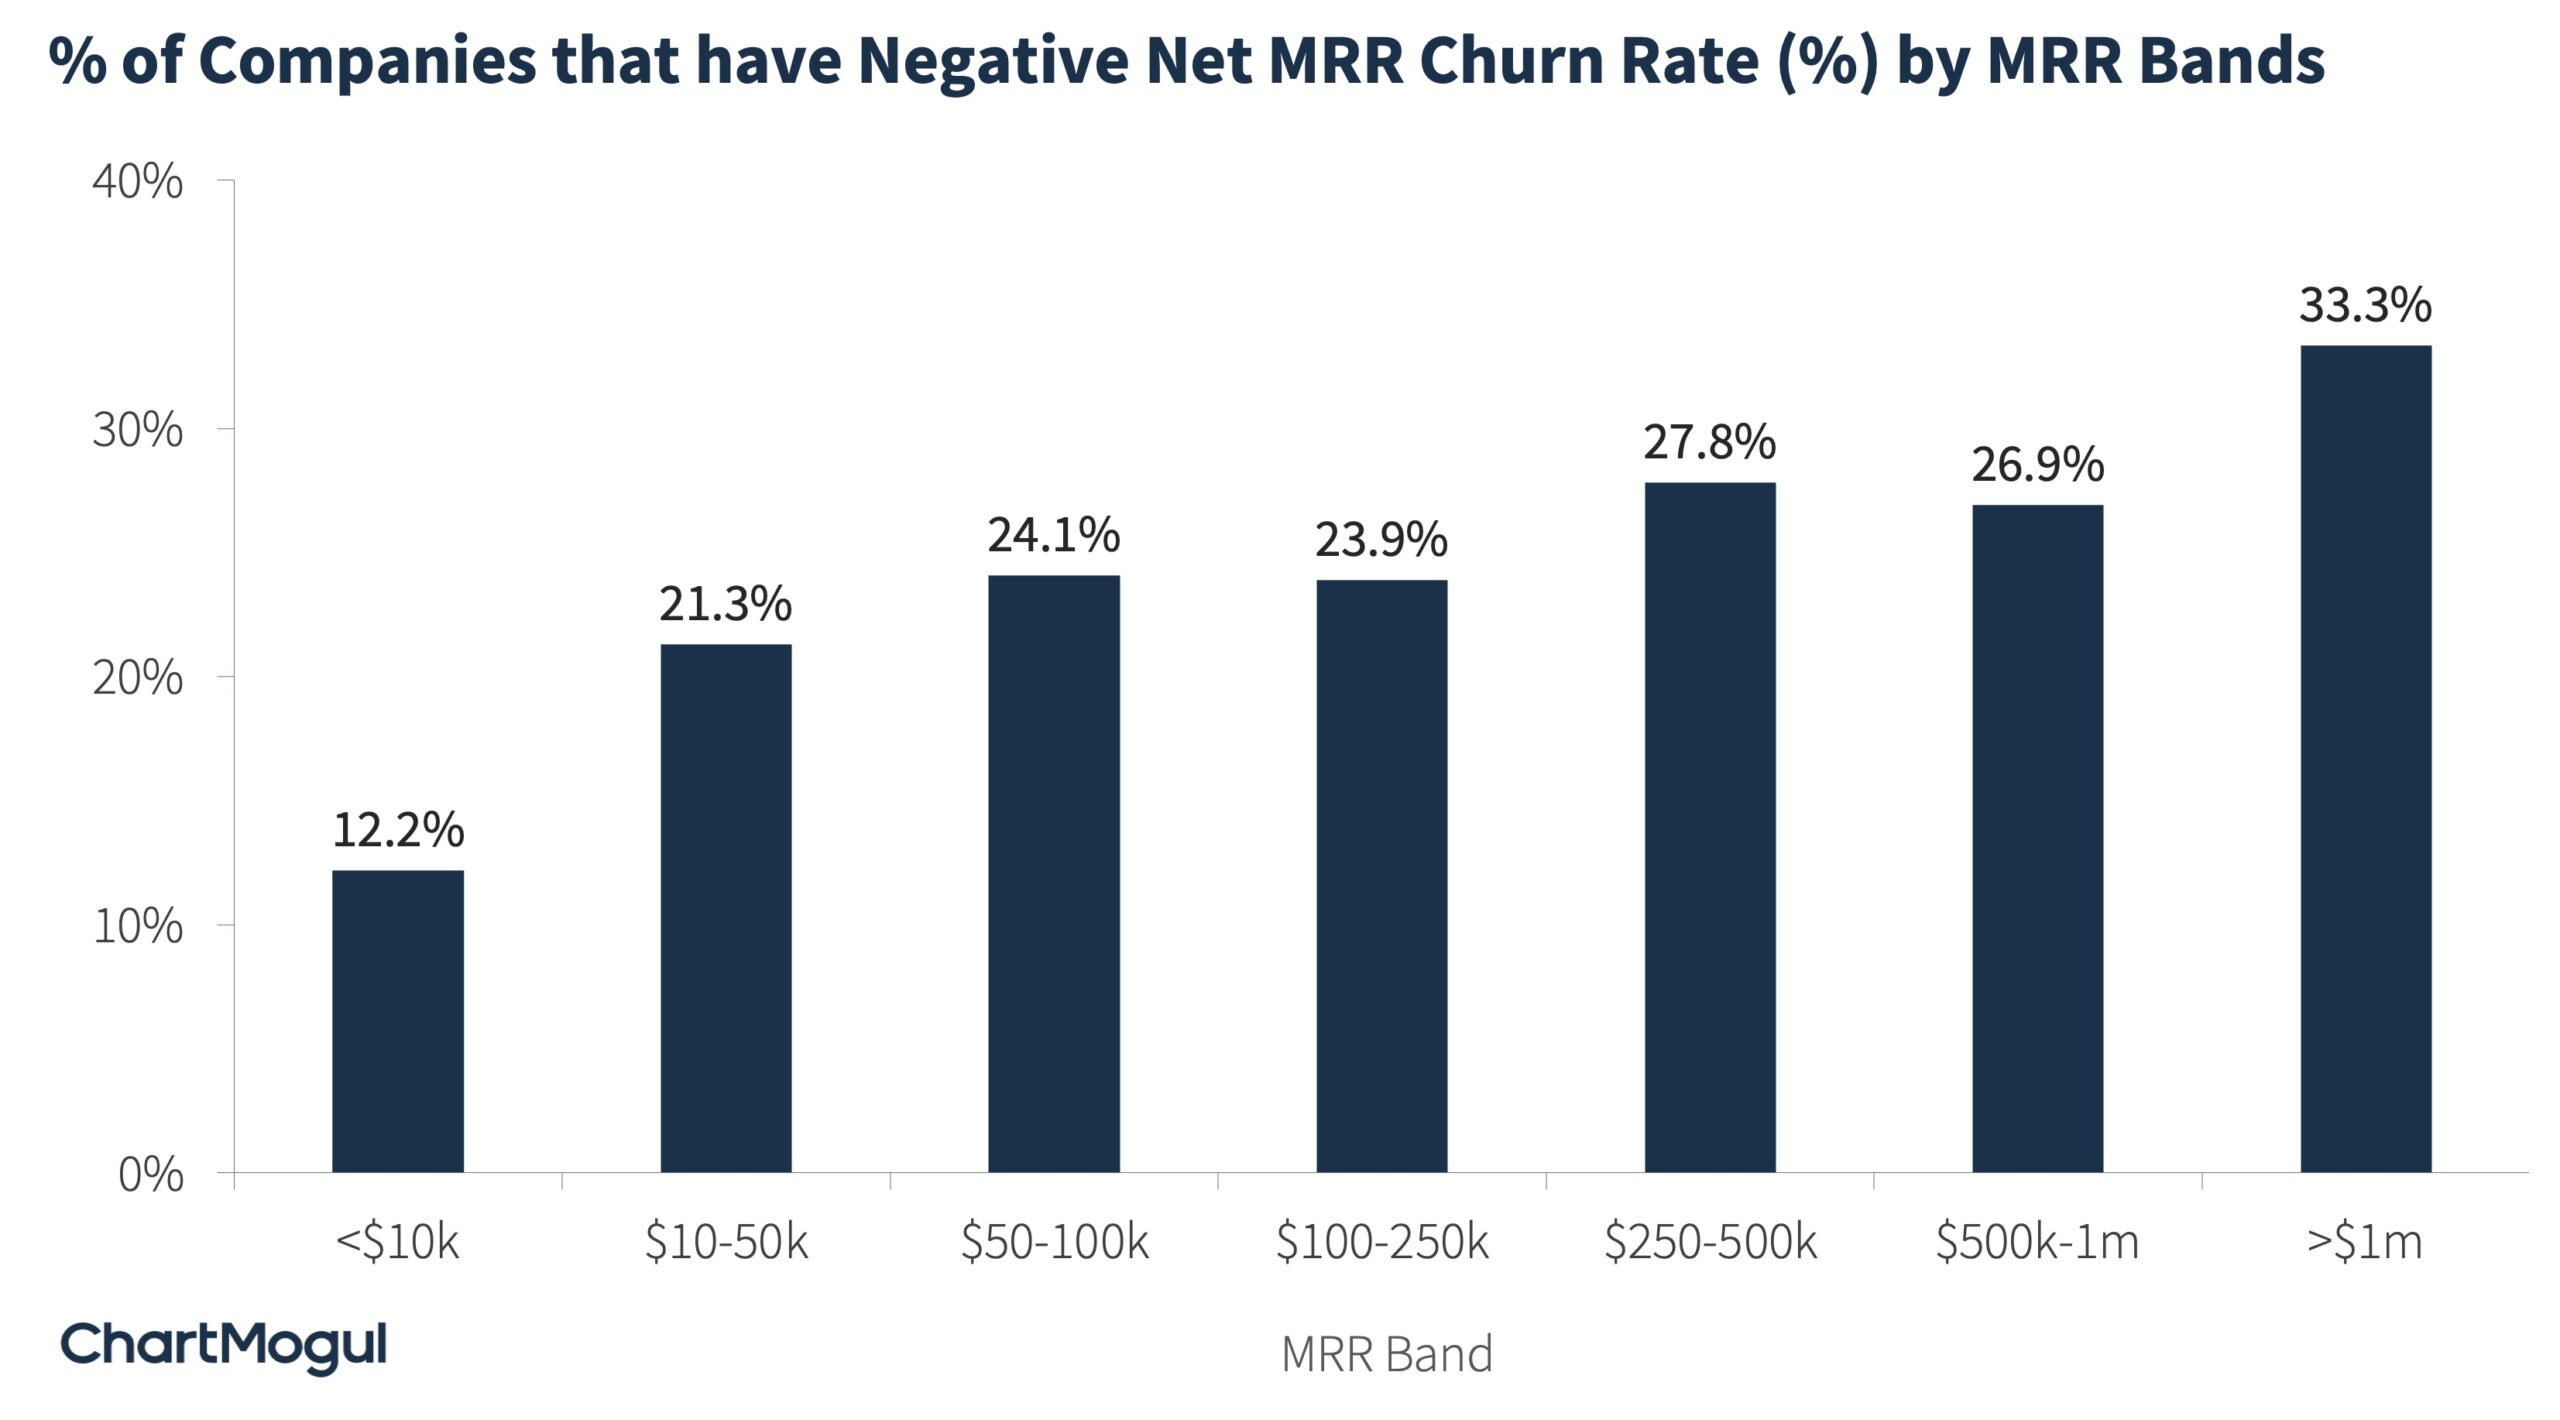 Percent of companies with negative churn at each MRR band